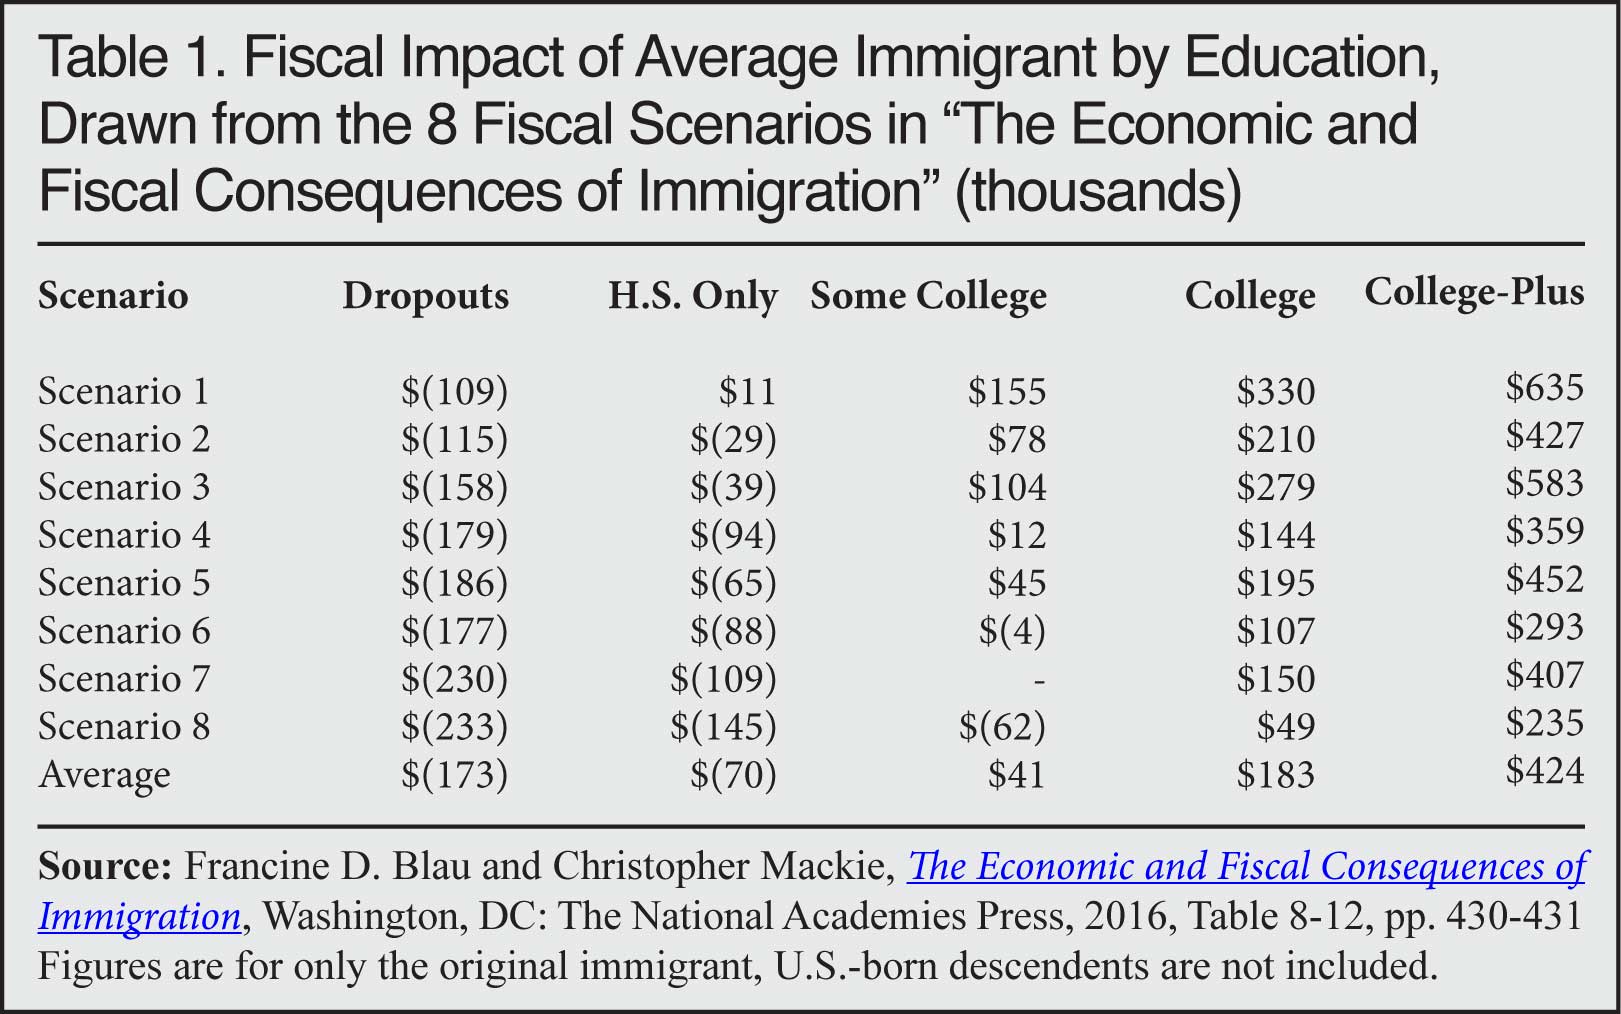 Table: Fiscal Impact of Average Immigrant by Education, Drawn from the 8 Fiscal Scenarios in "The Economic and Fiscal Consequences of Immigration" 